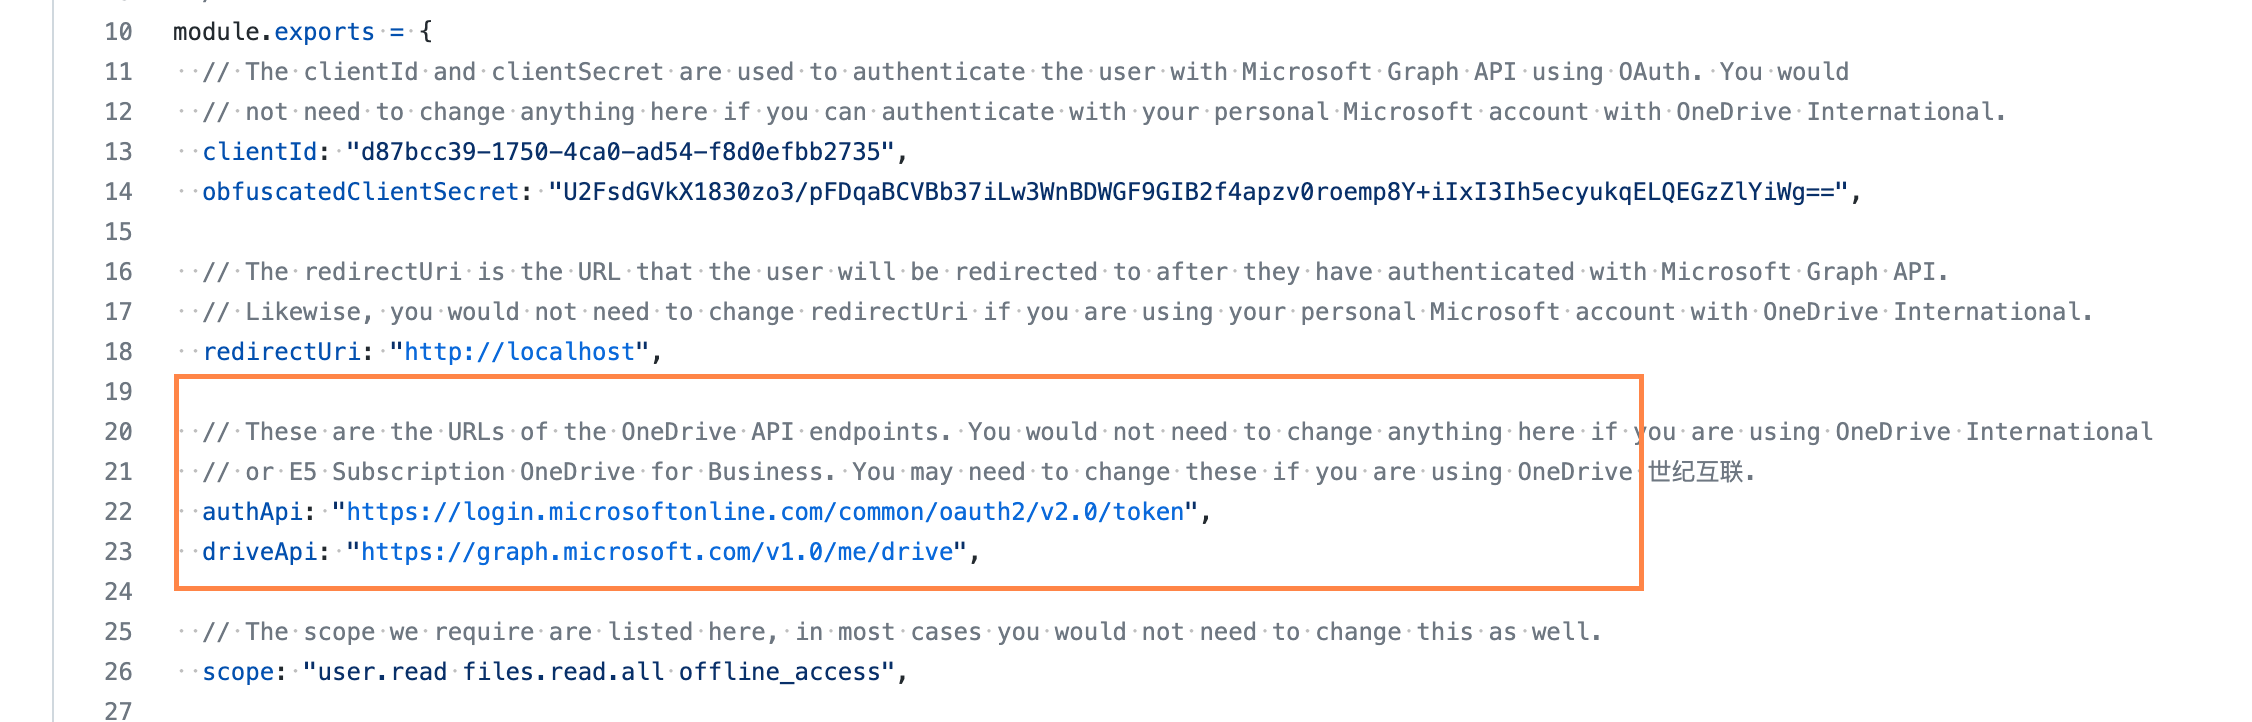 Change authApi and driveApi only if you are a SharePoint user